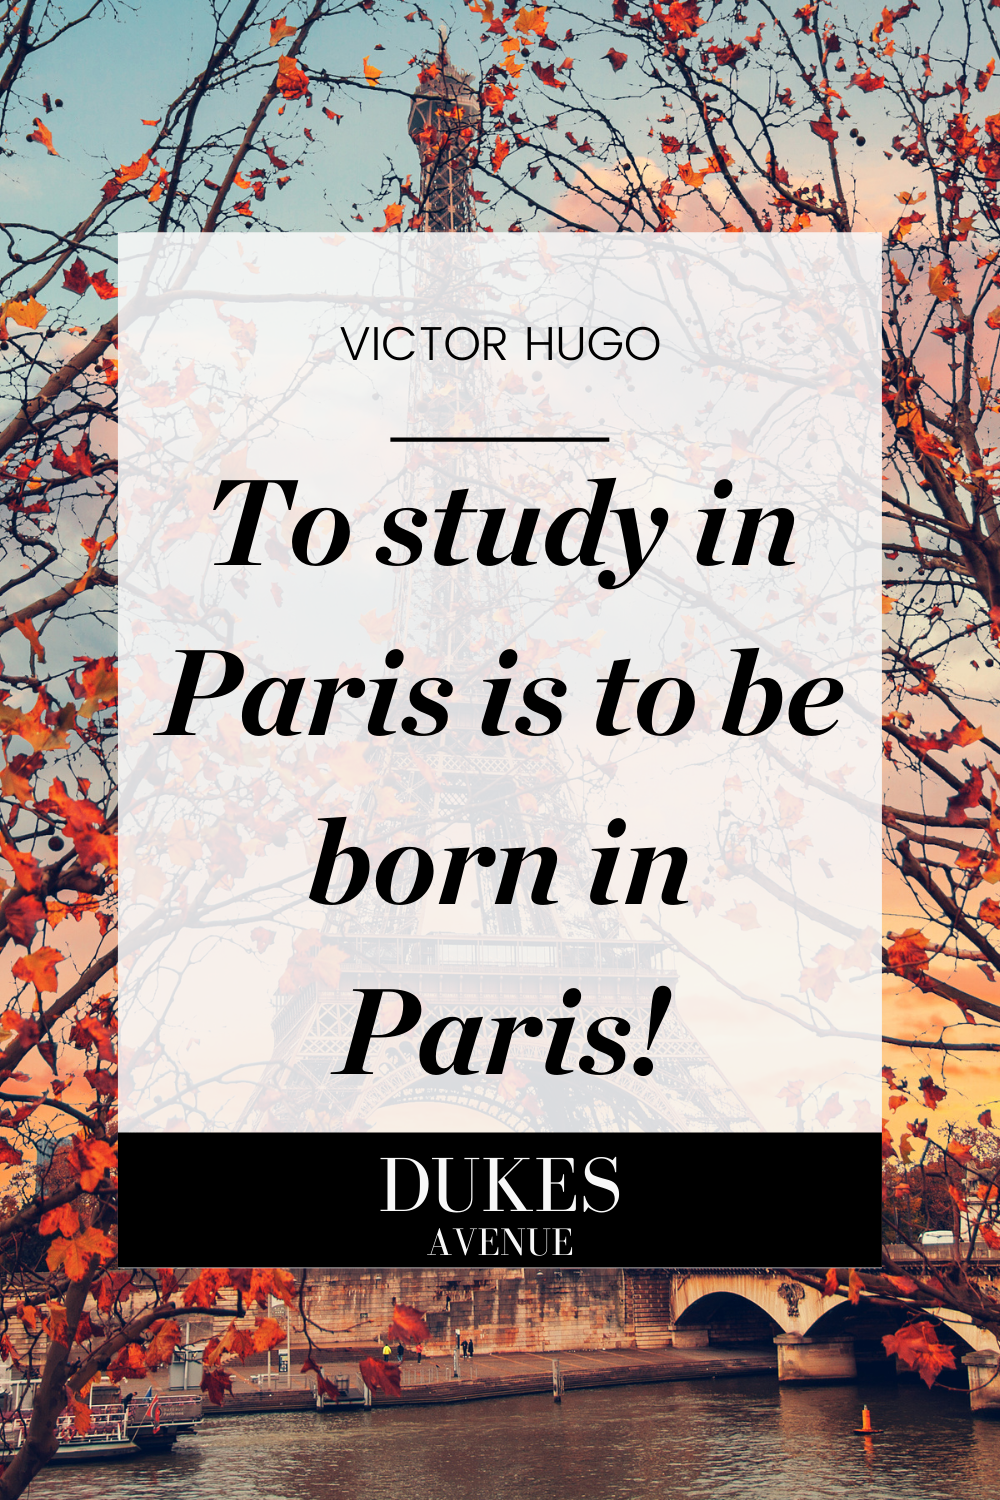 Picture of Eiffel Tower in the spring with text overlay of one of Victor Hugo's quotes about Paris